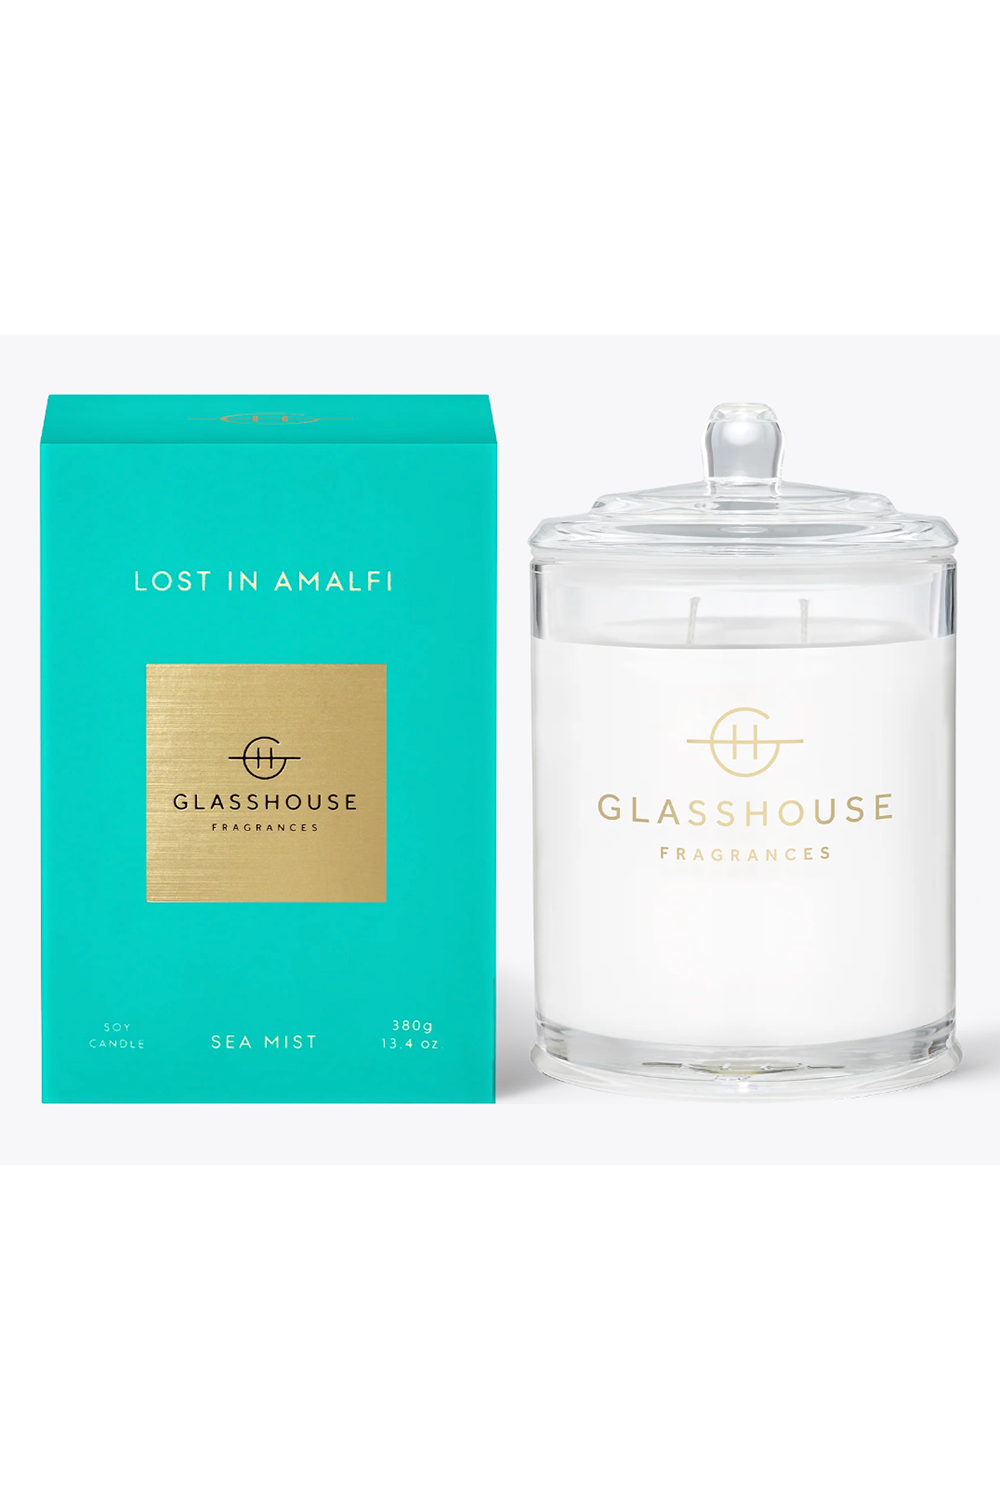 Glasshouse Fragrance Candle - Lost in Amalfi